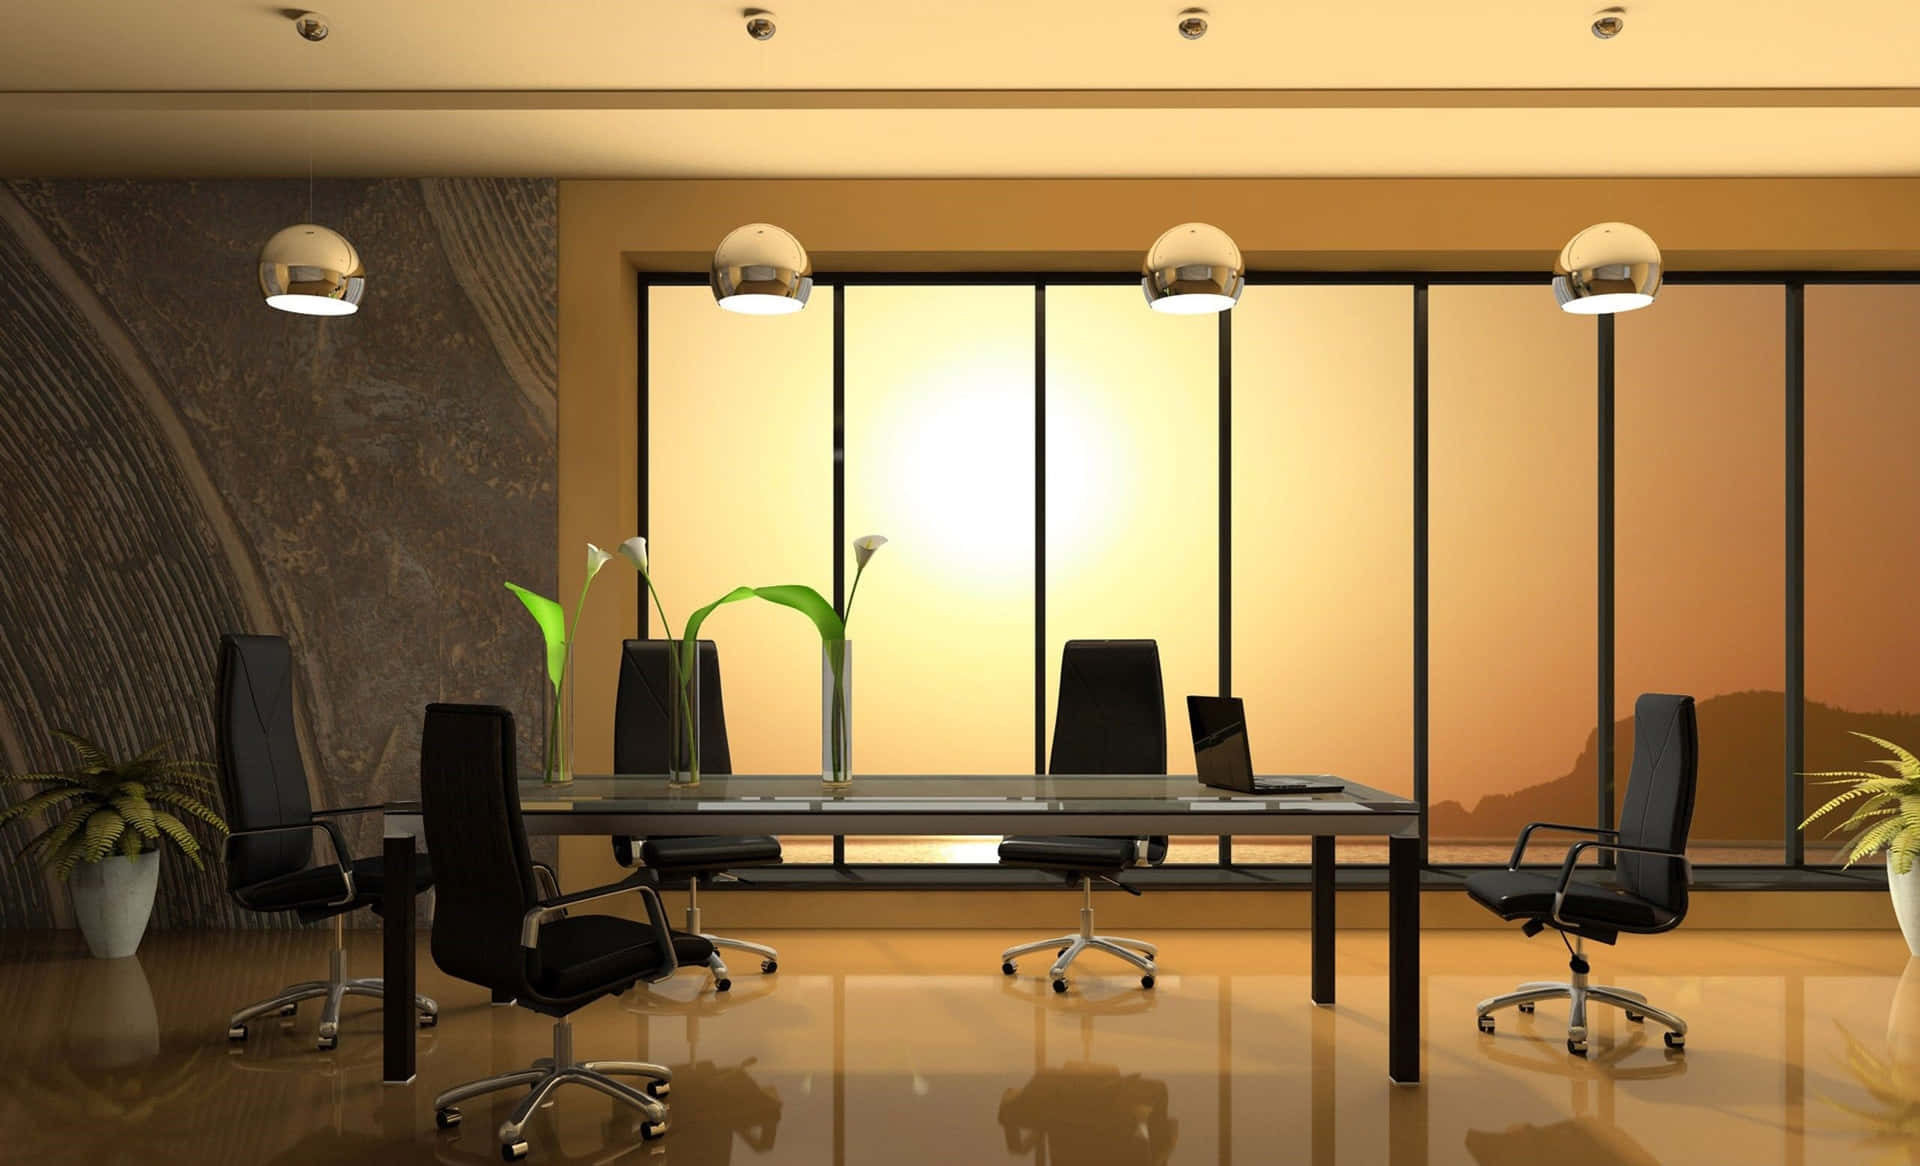 Sunset Boardroom 1440p Office Background